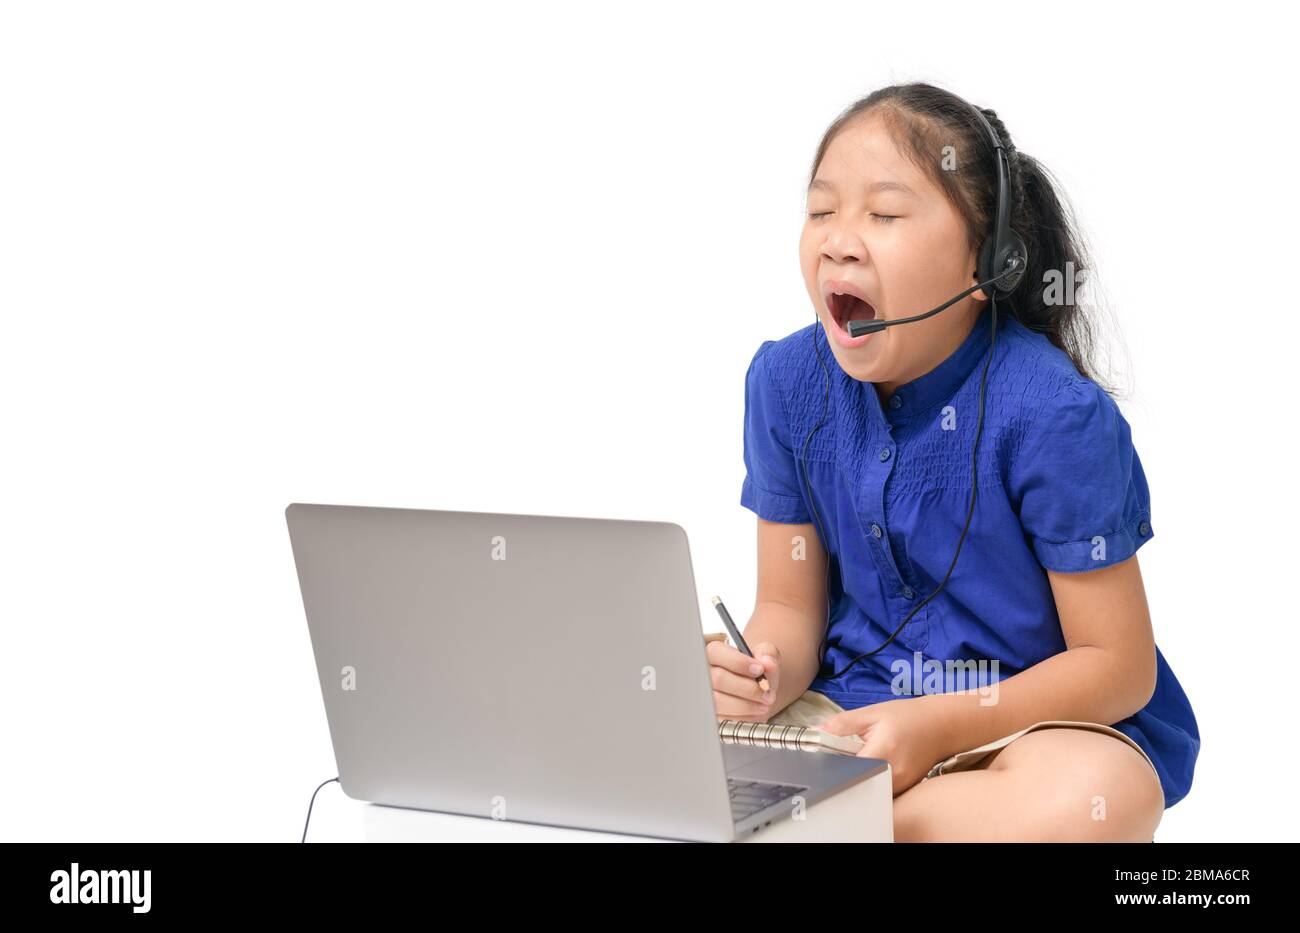 Coronavirus Outbreak. Lockdown and school closures. School girl watching online education classes yawning and bored at home. COVID-19 pandemic forces Stock Photo